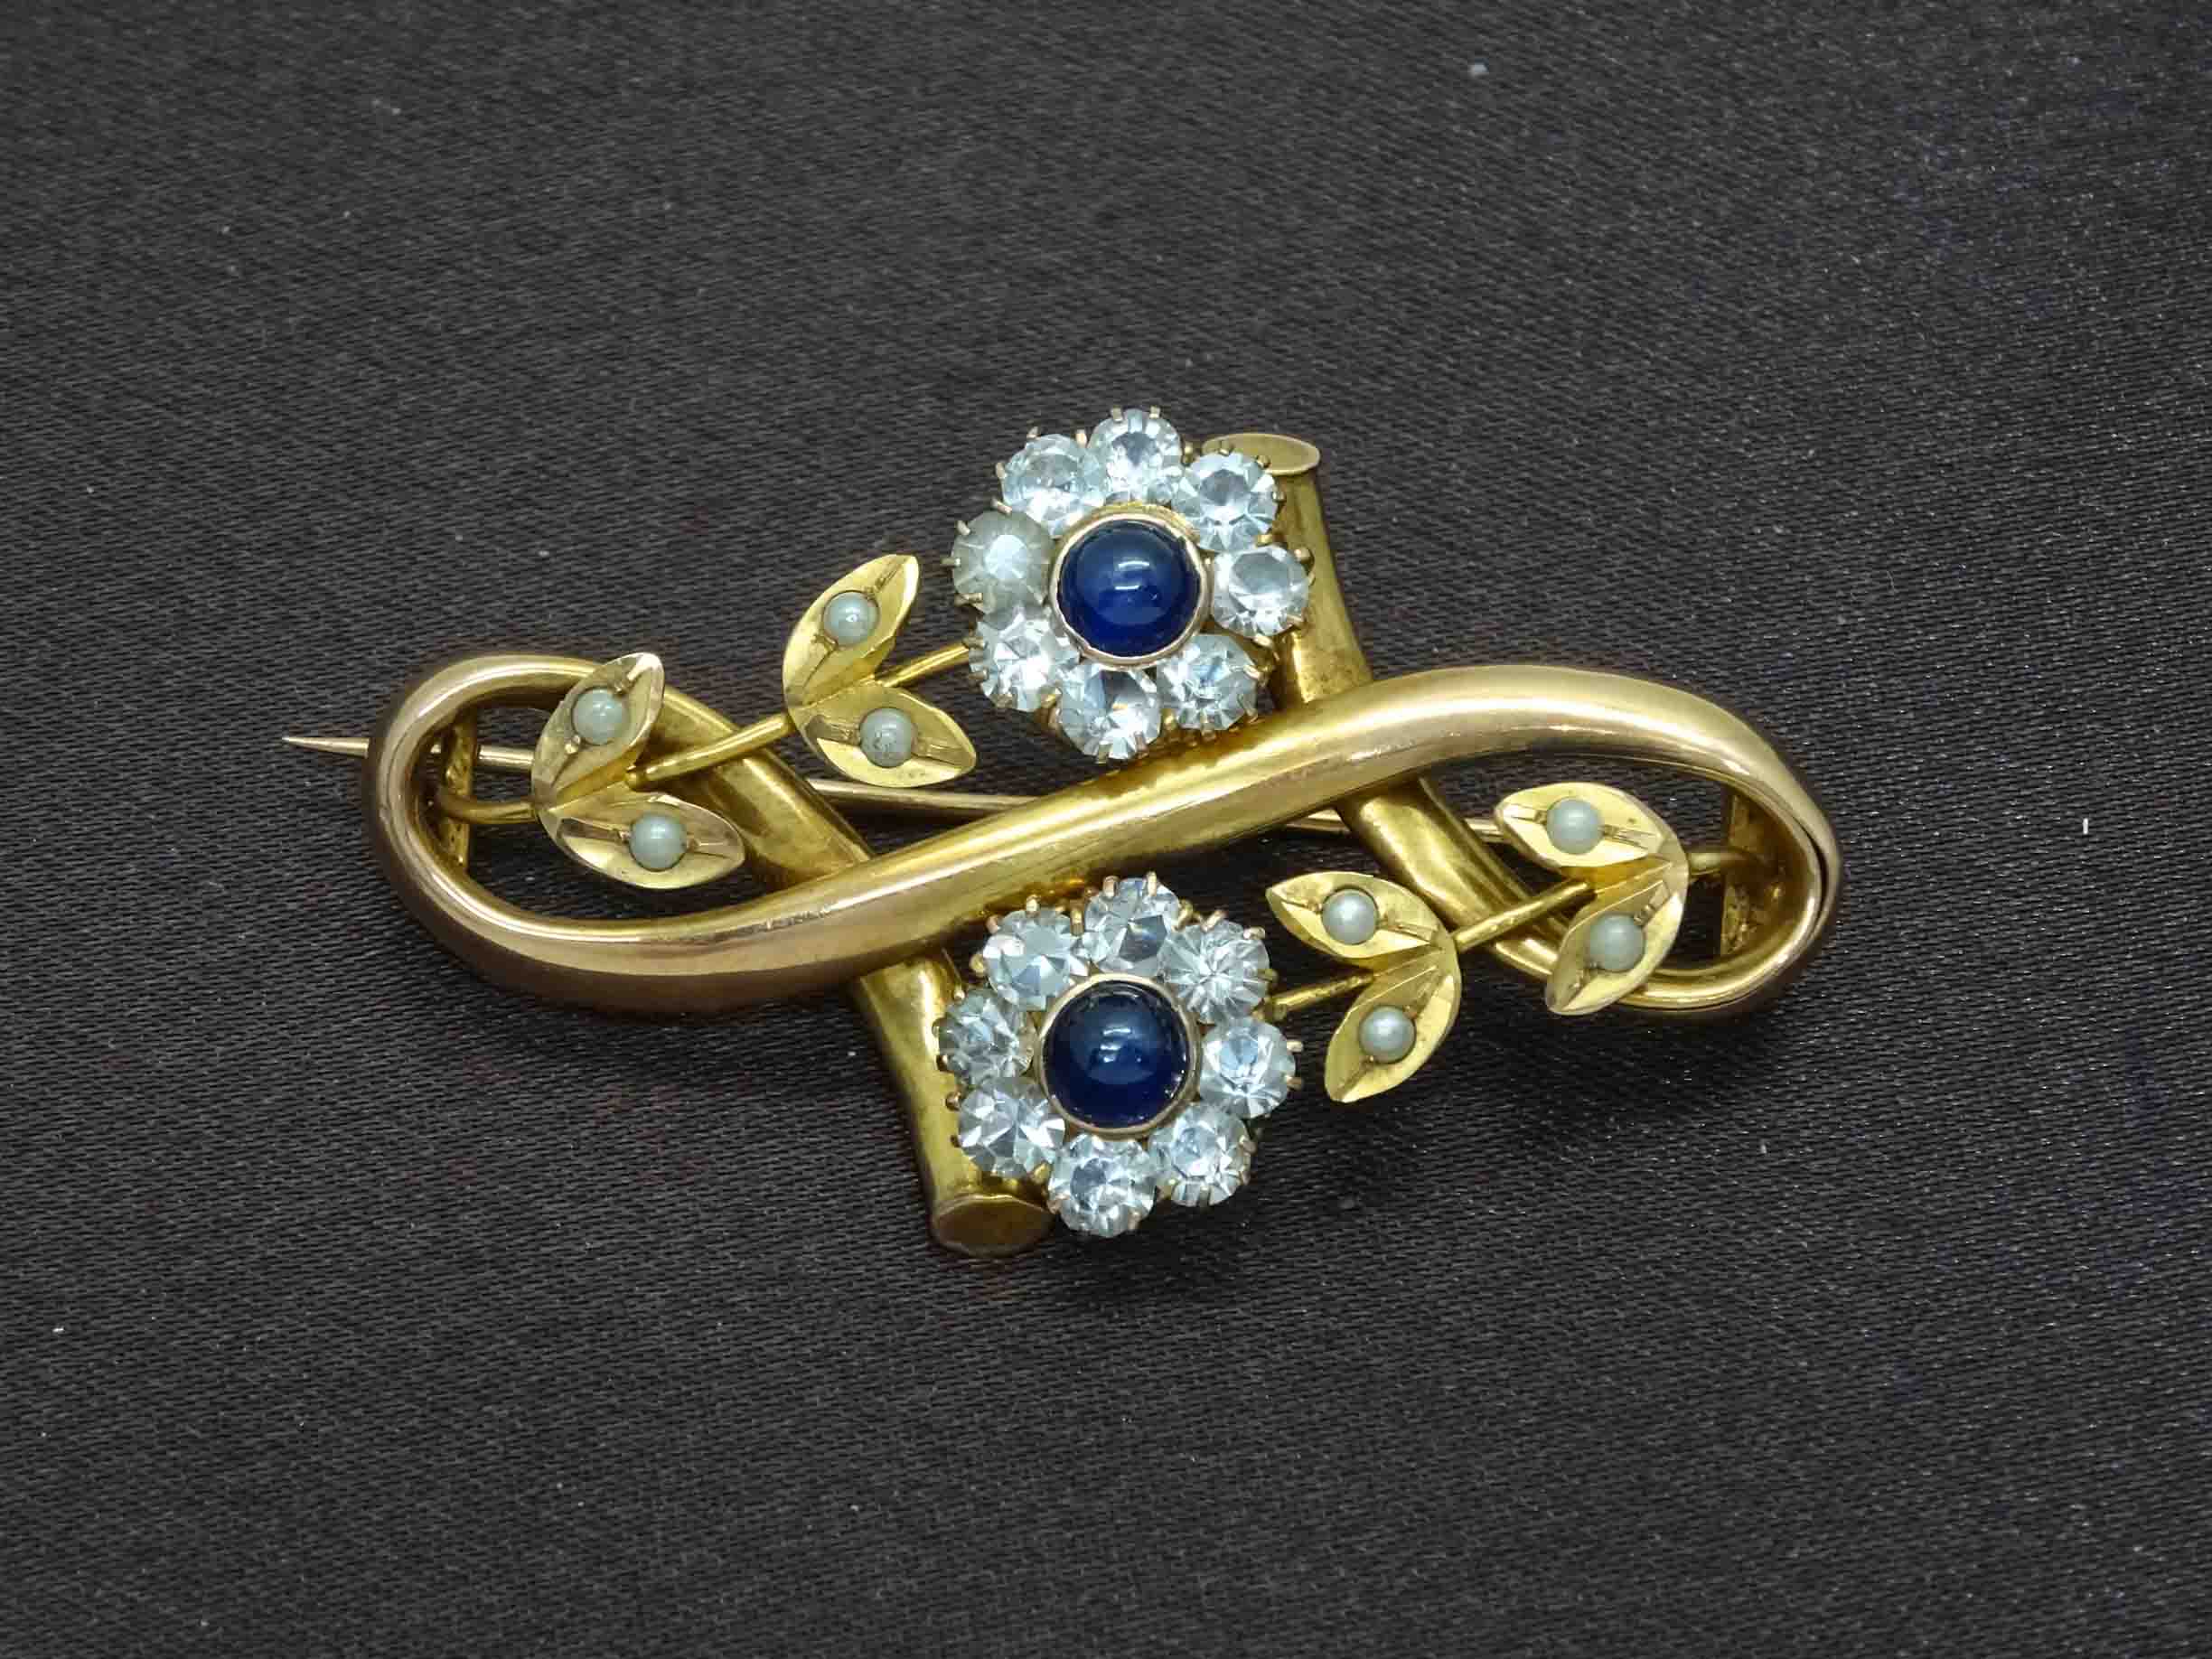 Antique EROV Sapphire & Seed Pearl & Crystal Floral Brooch Pin 14k